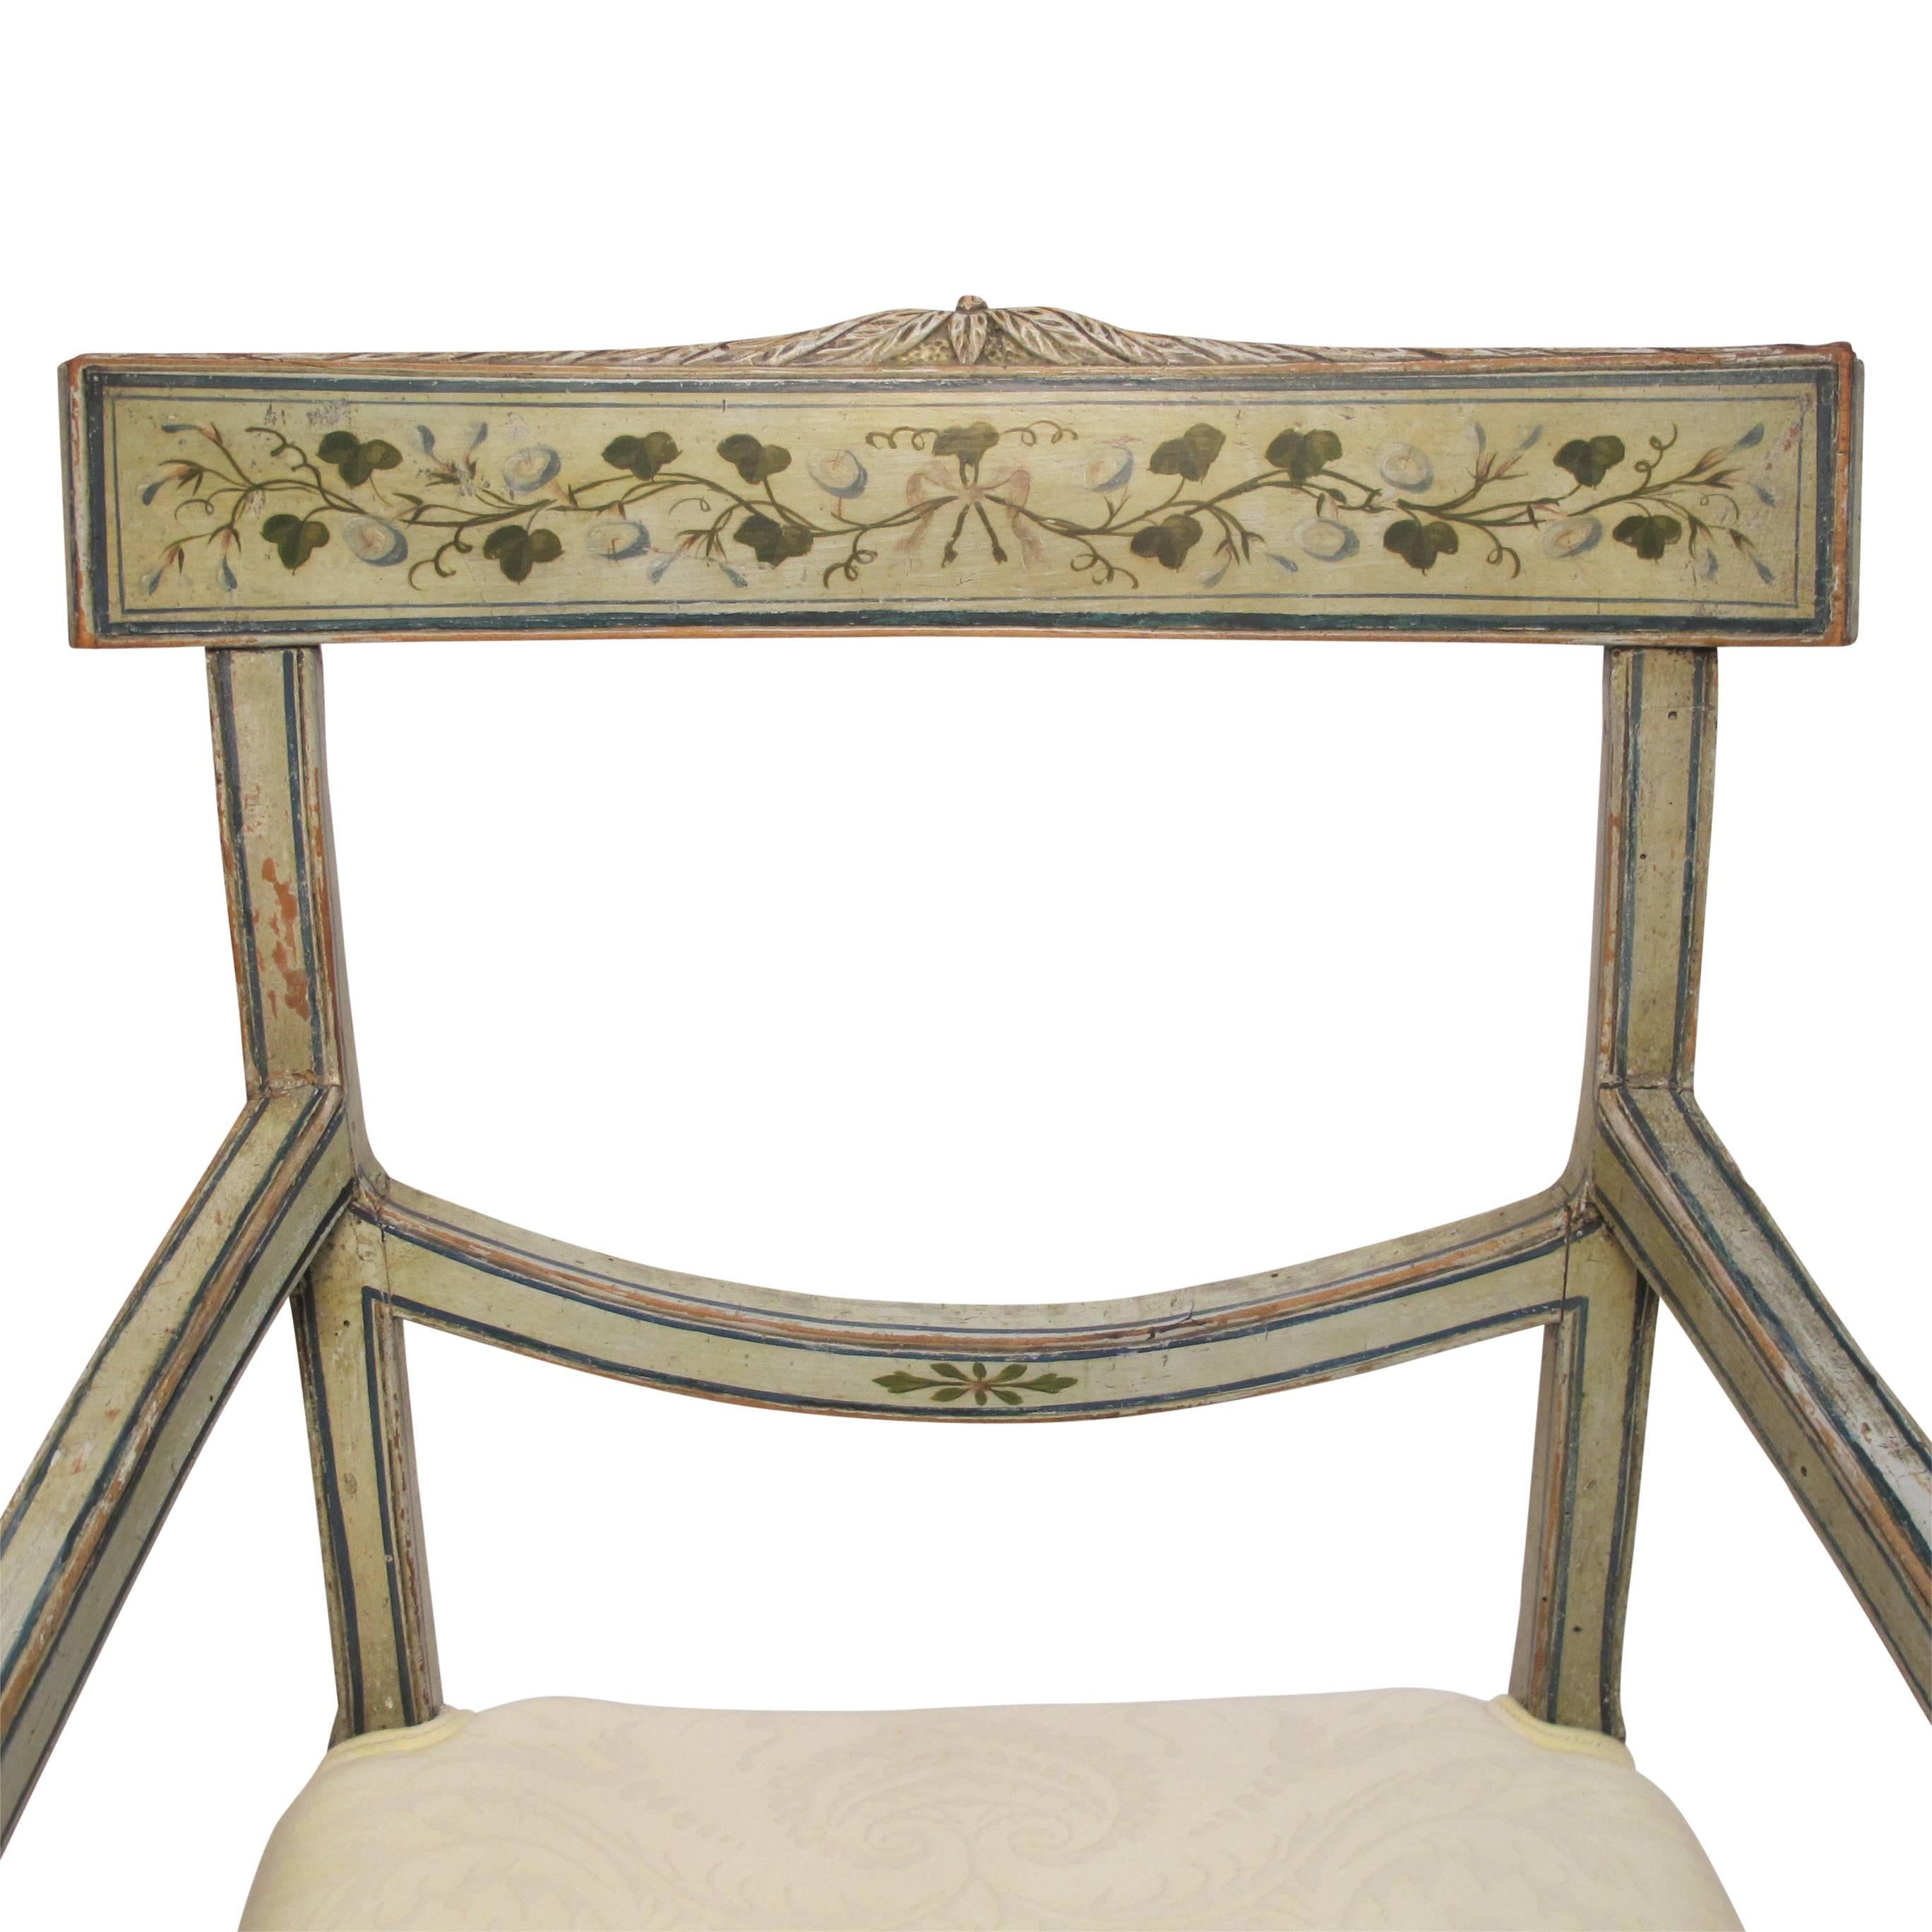 Hand-Painted Swedish Green Painted Armchair with Vintage Fortuny Upholstery, 19th Century